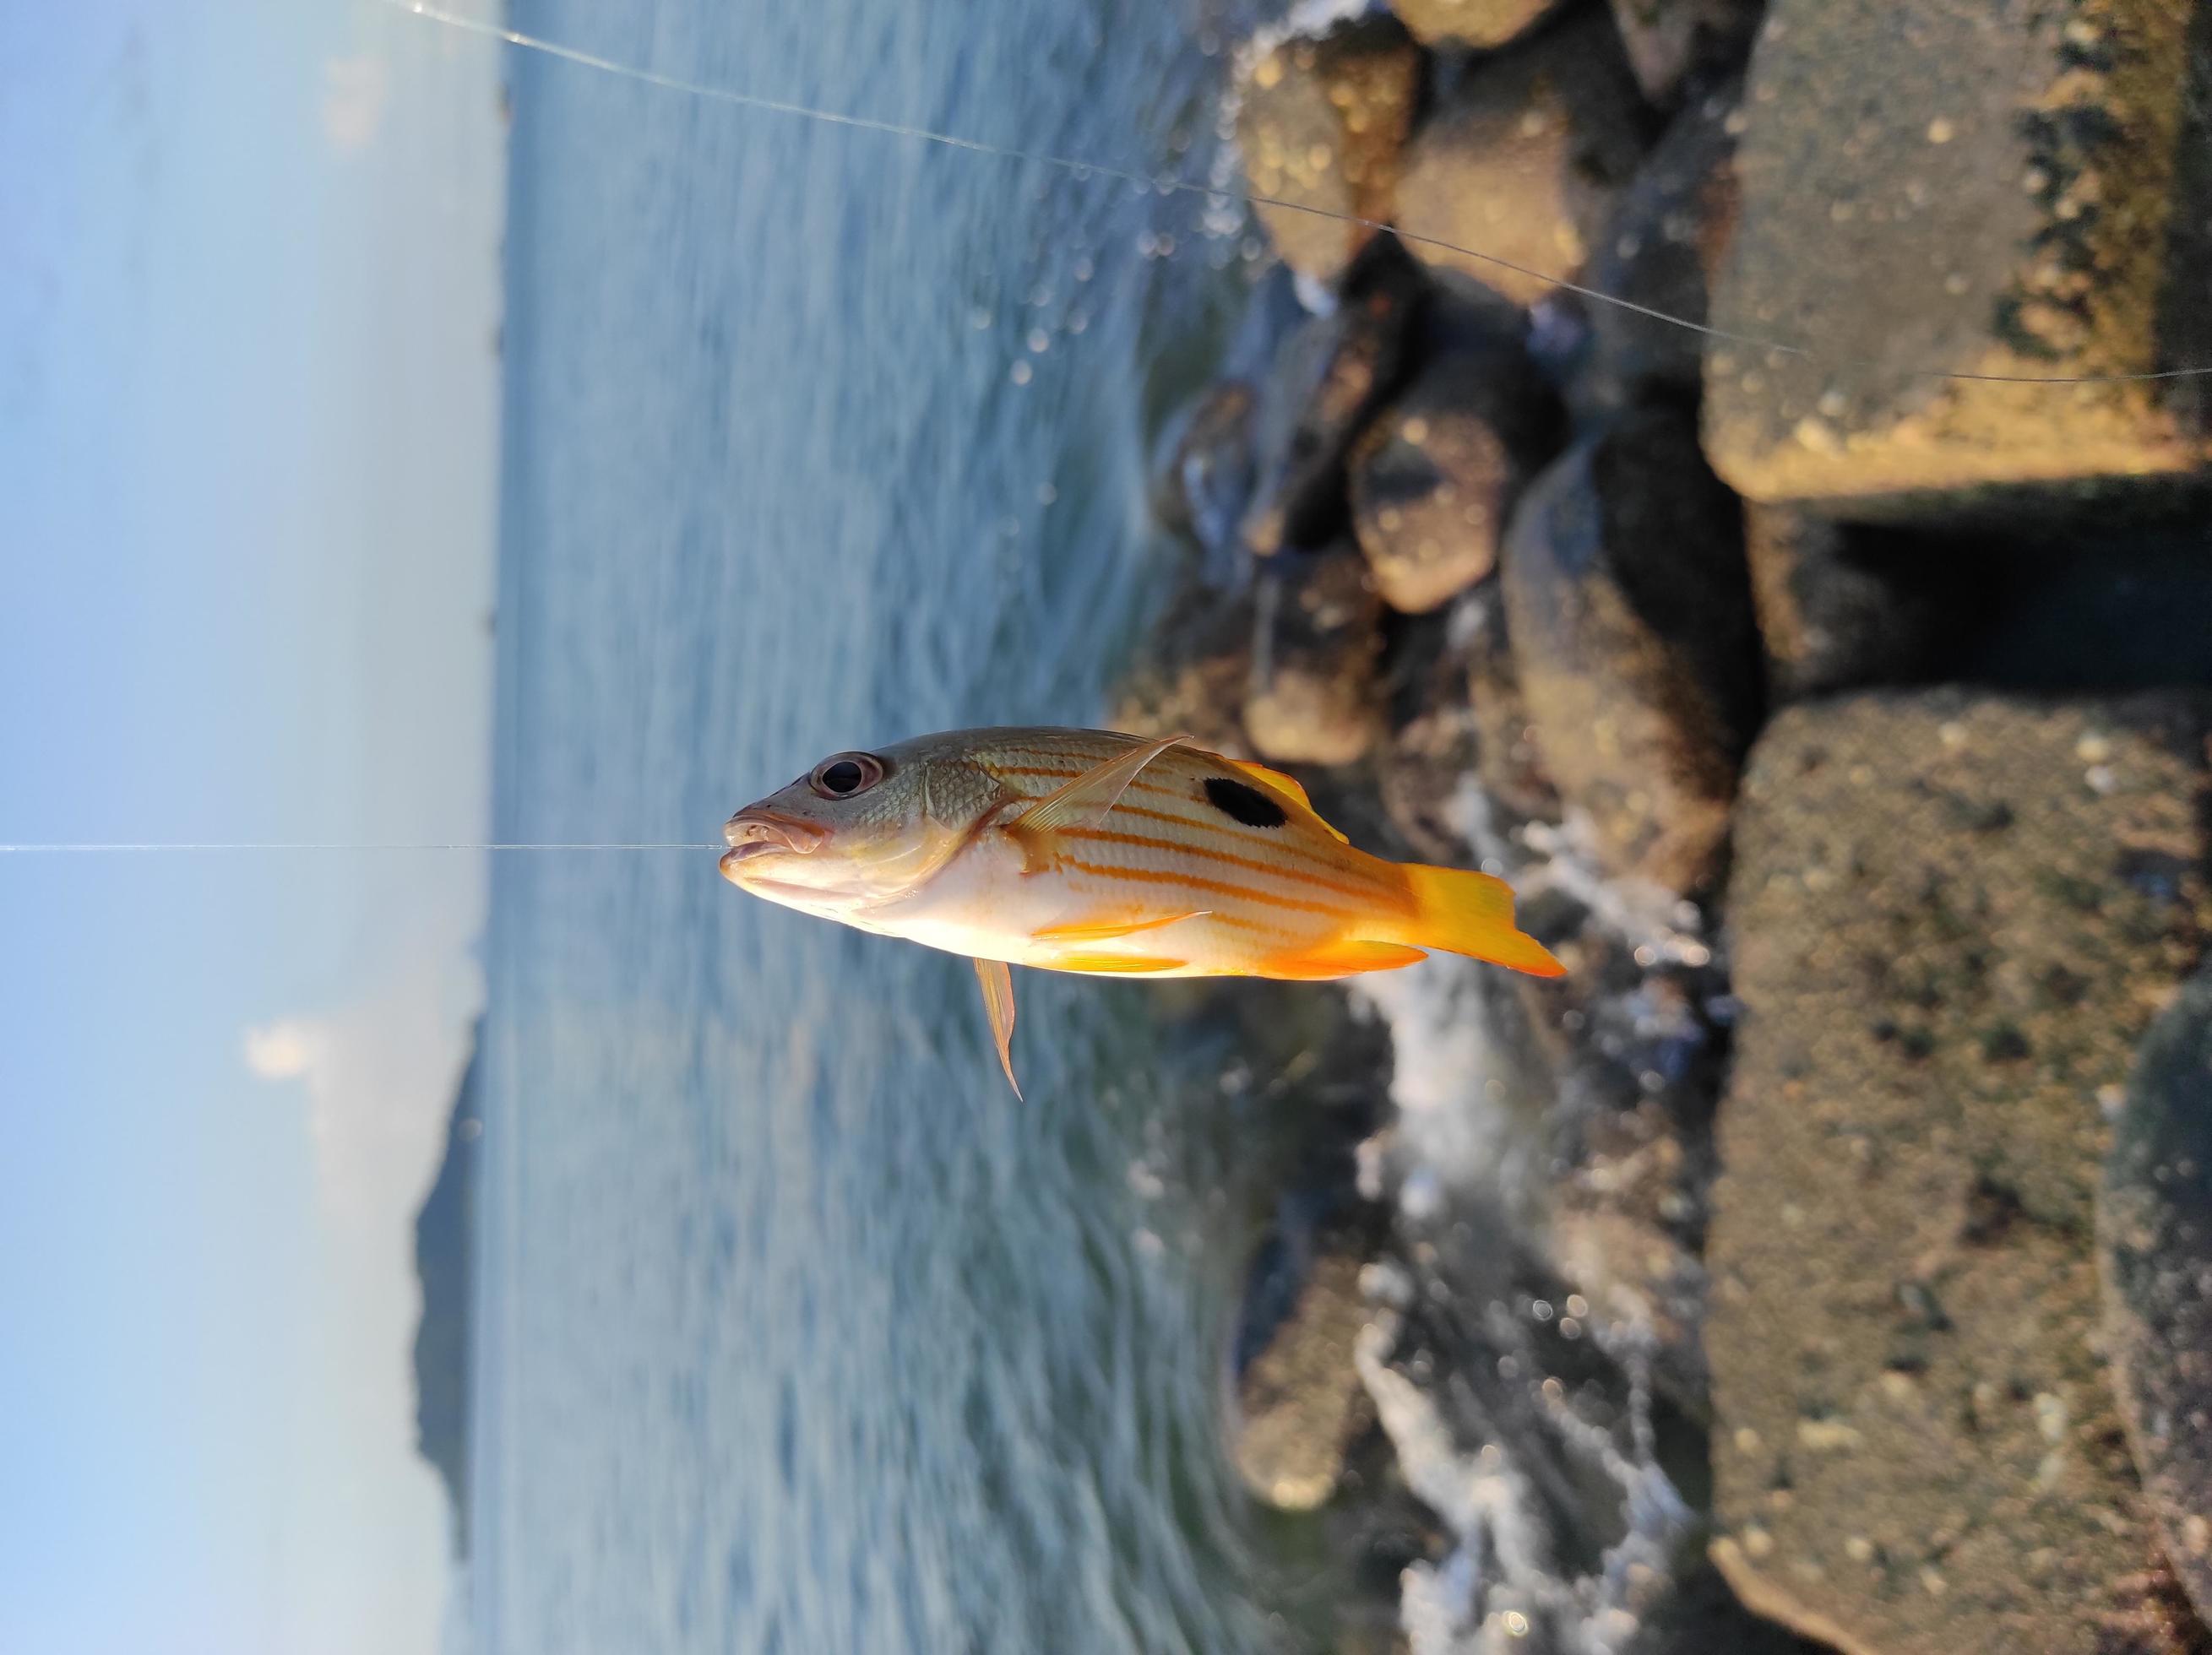 https://static.vecteezy.com/system/resources/previews/004/962/803/large_2x/dory-snapper-or-lutjanus-fulviflamma-caught-using-a-nylon-fishing-line-on-the-seashore-with-lots-of-rocks-free-photo.jpg